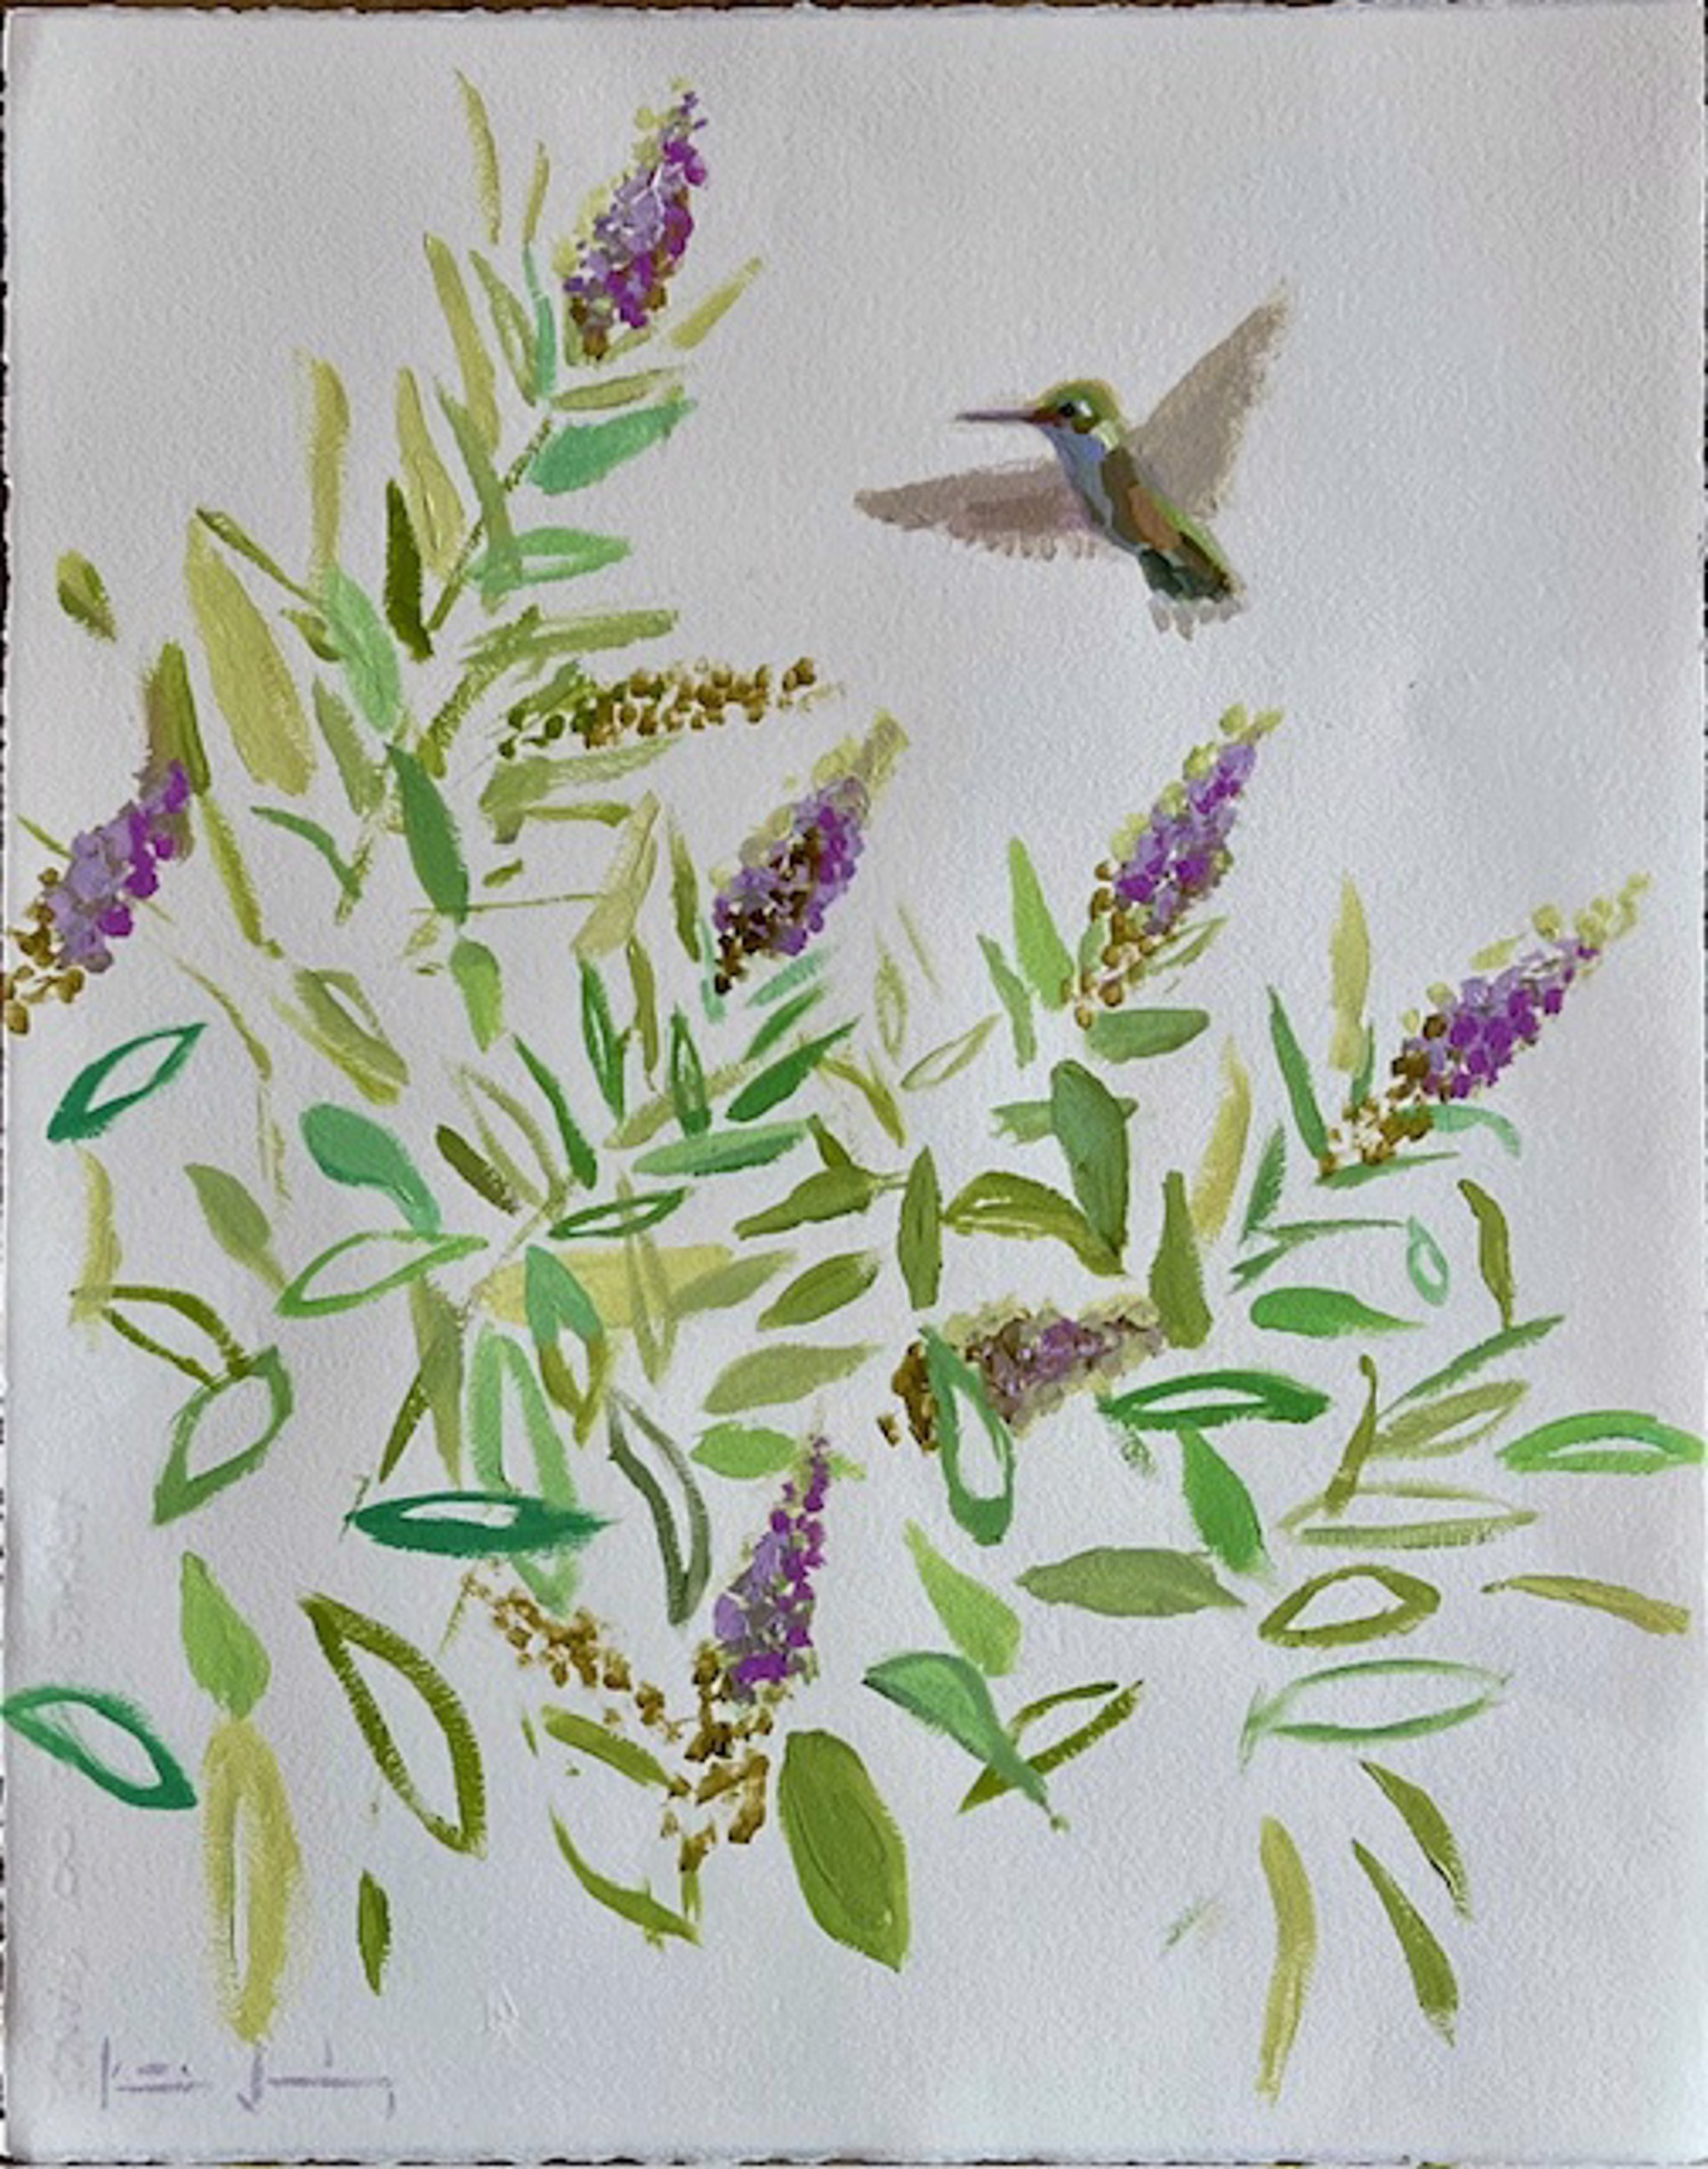 Hummingbird at the Butterfly Bush by Katie Jacobson